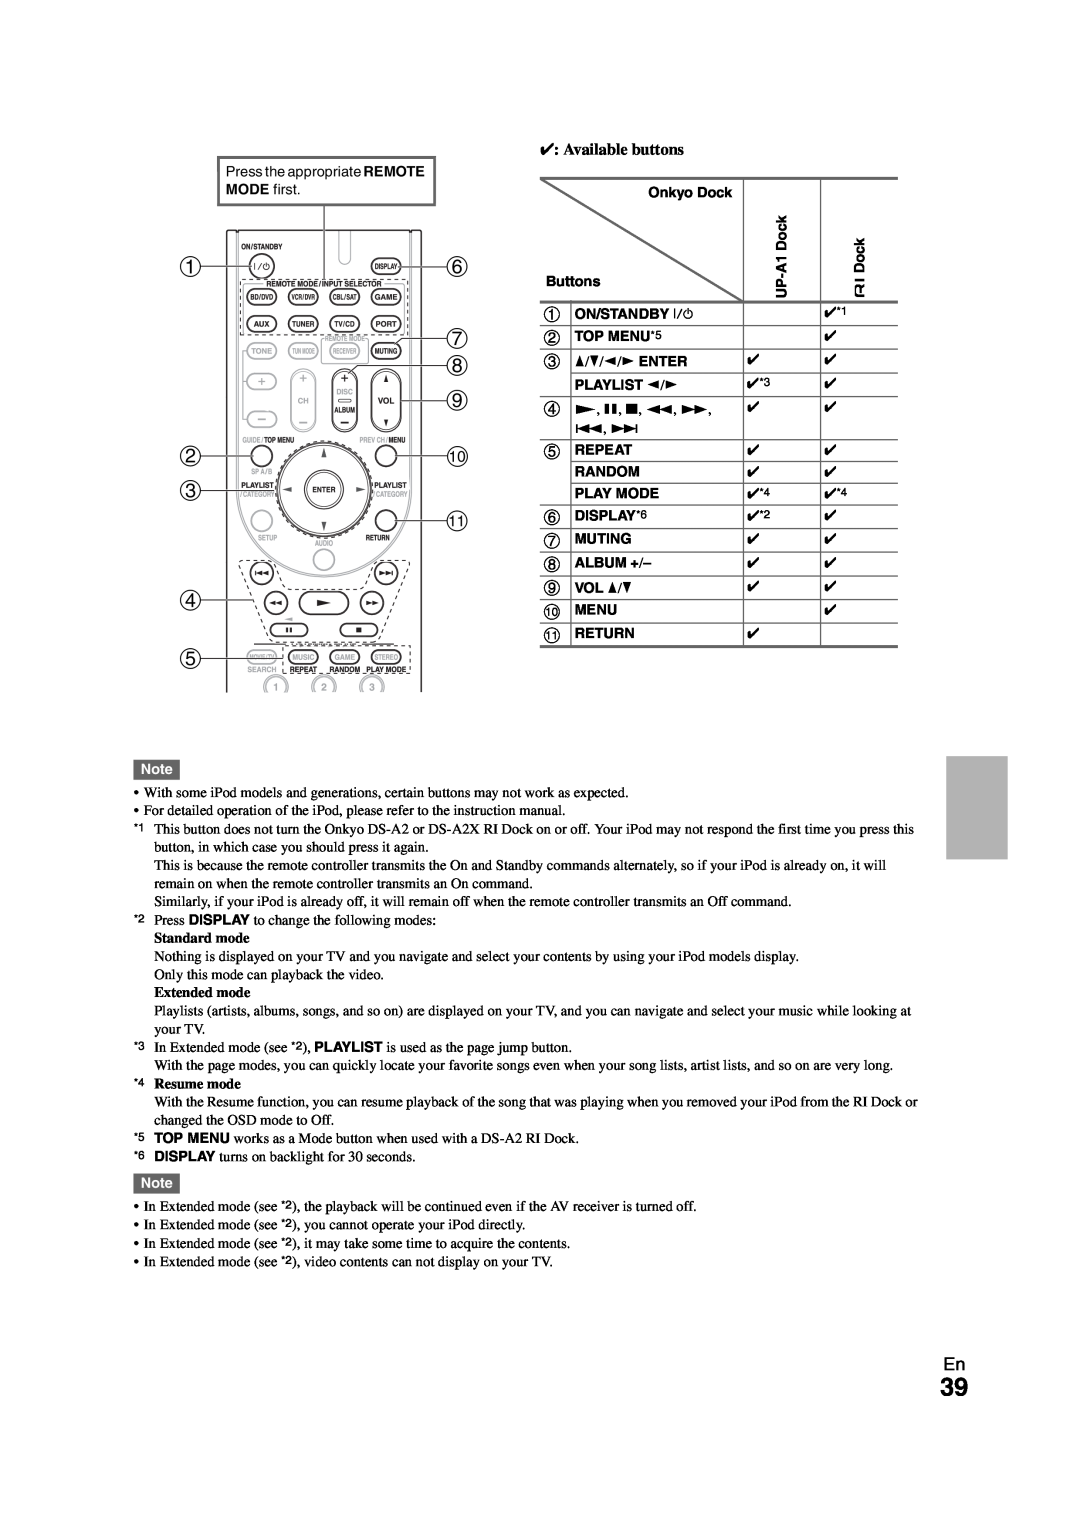 Onkyo 29400468 instruction manual Available buttons 